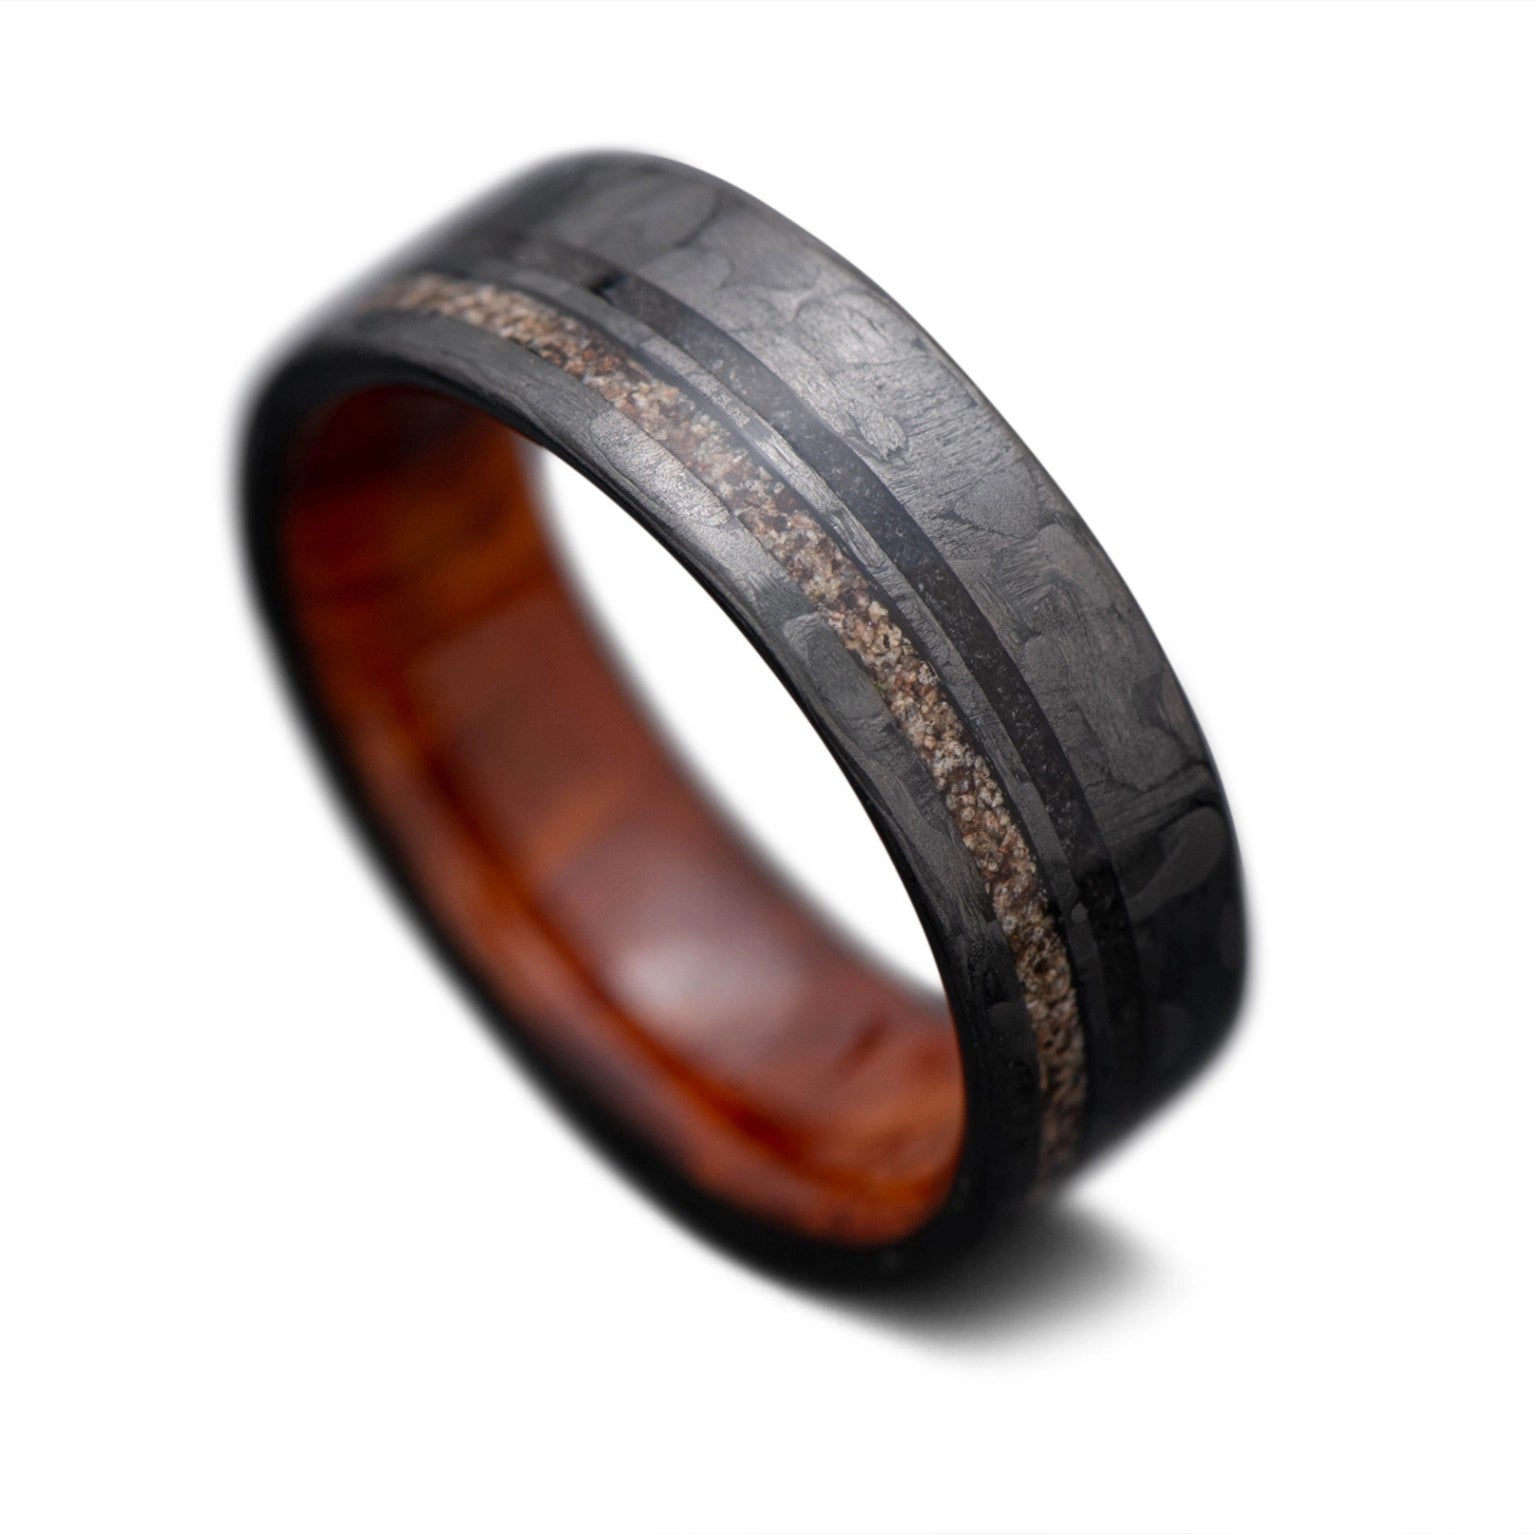 CarbonTwill Core Ring with Black Onyx, Crushed T-Rex inlay and Thuya inner sleeve, 7mm -THE SEEKER